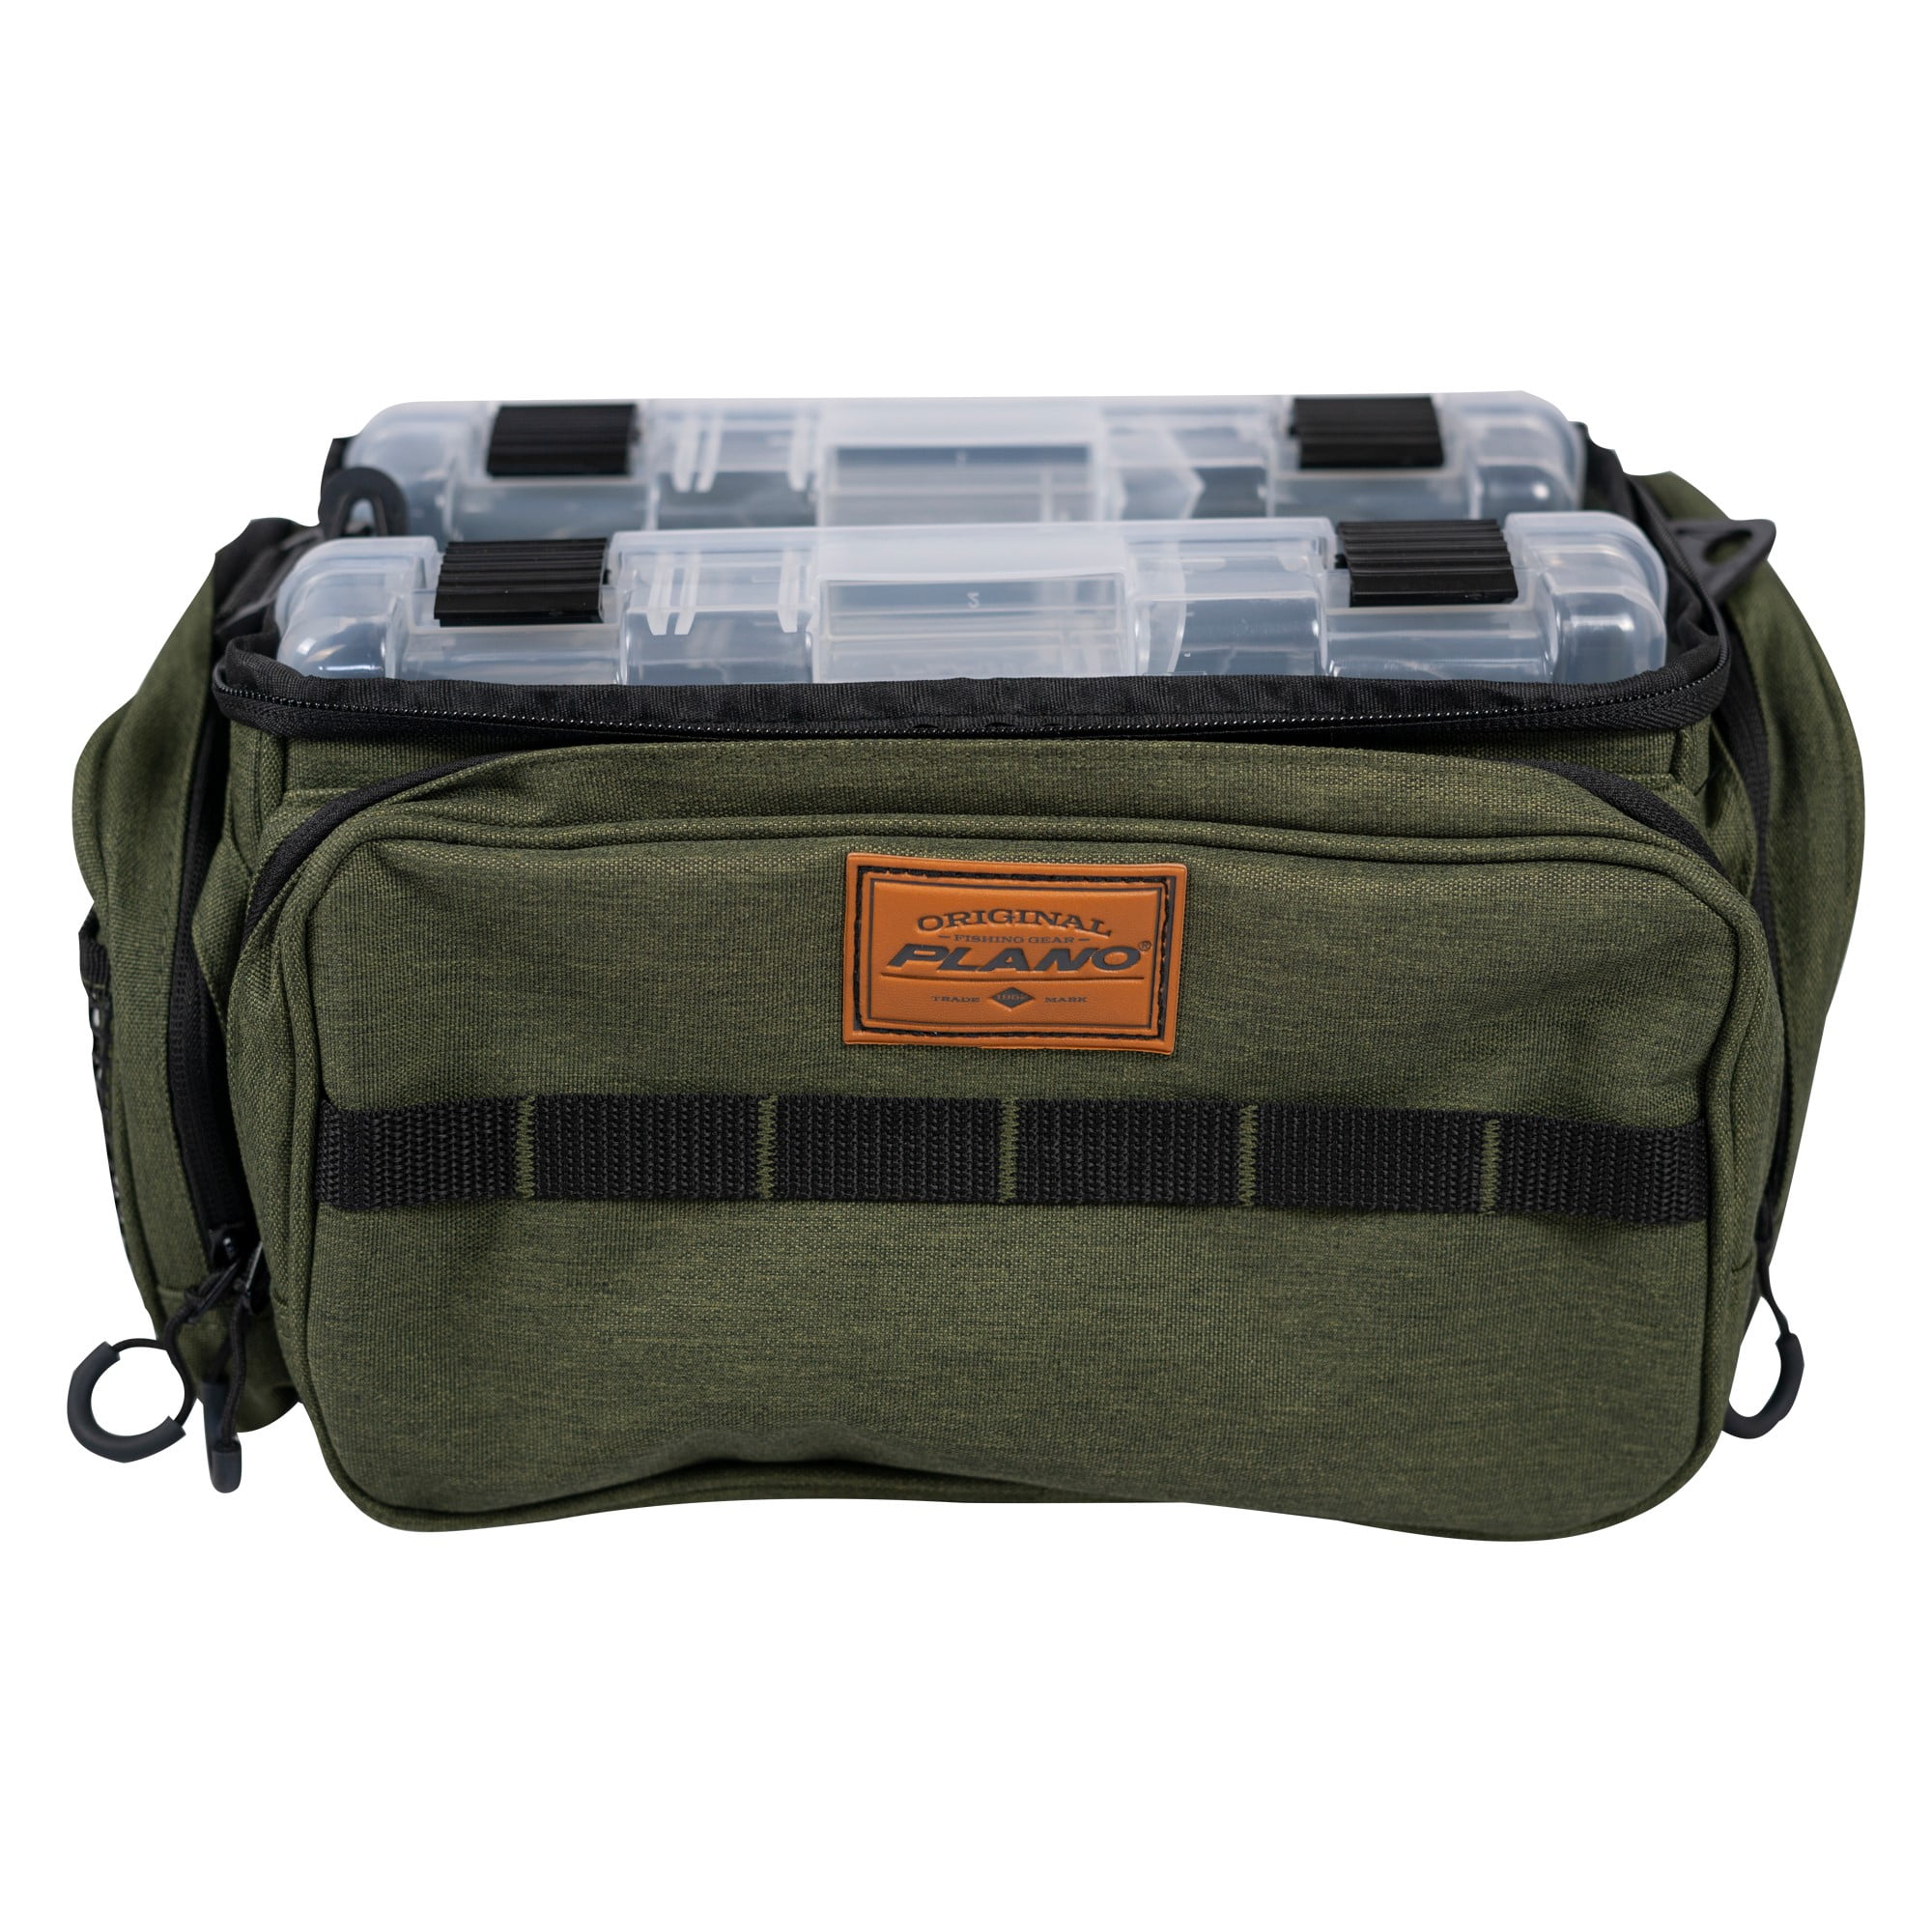 PLANO Rustrictor Series 3600 Tackle Bag Fishing BAG ONLY 